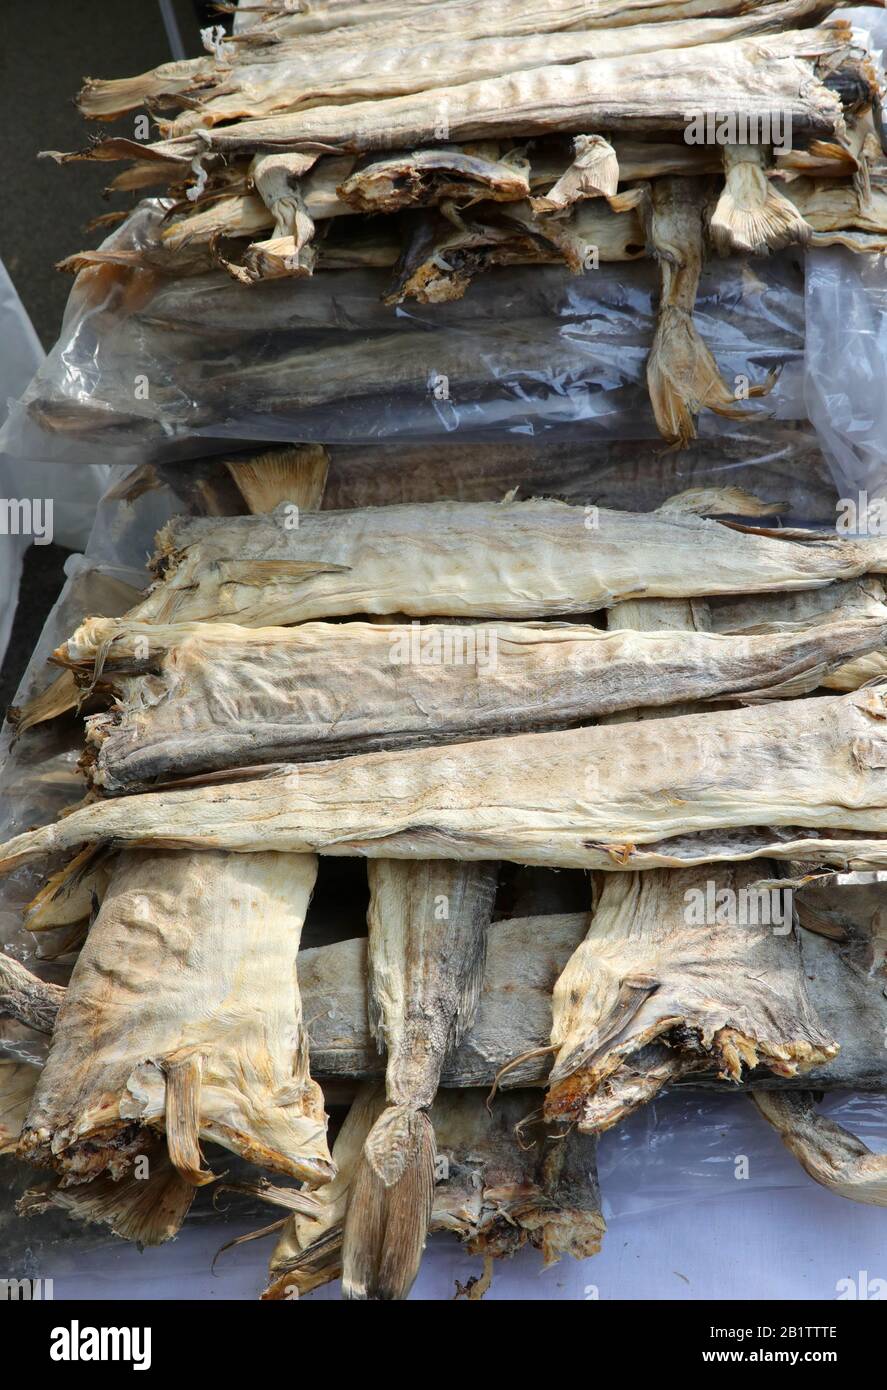 many dried headless stockfish dried in the sun for sale at sih market Stock Photo